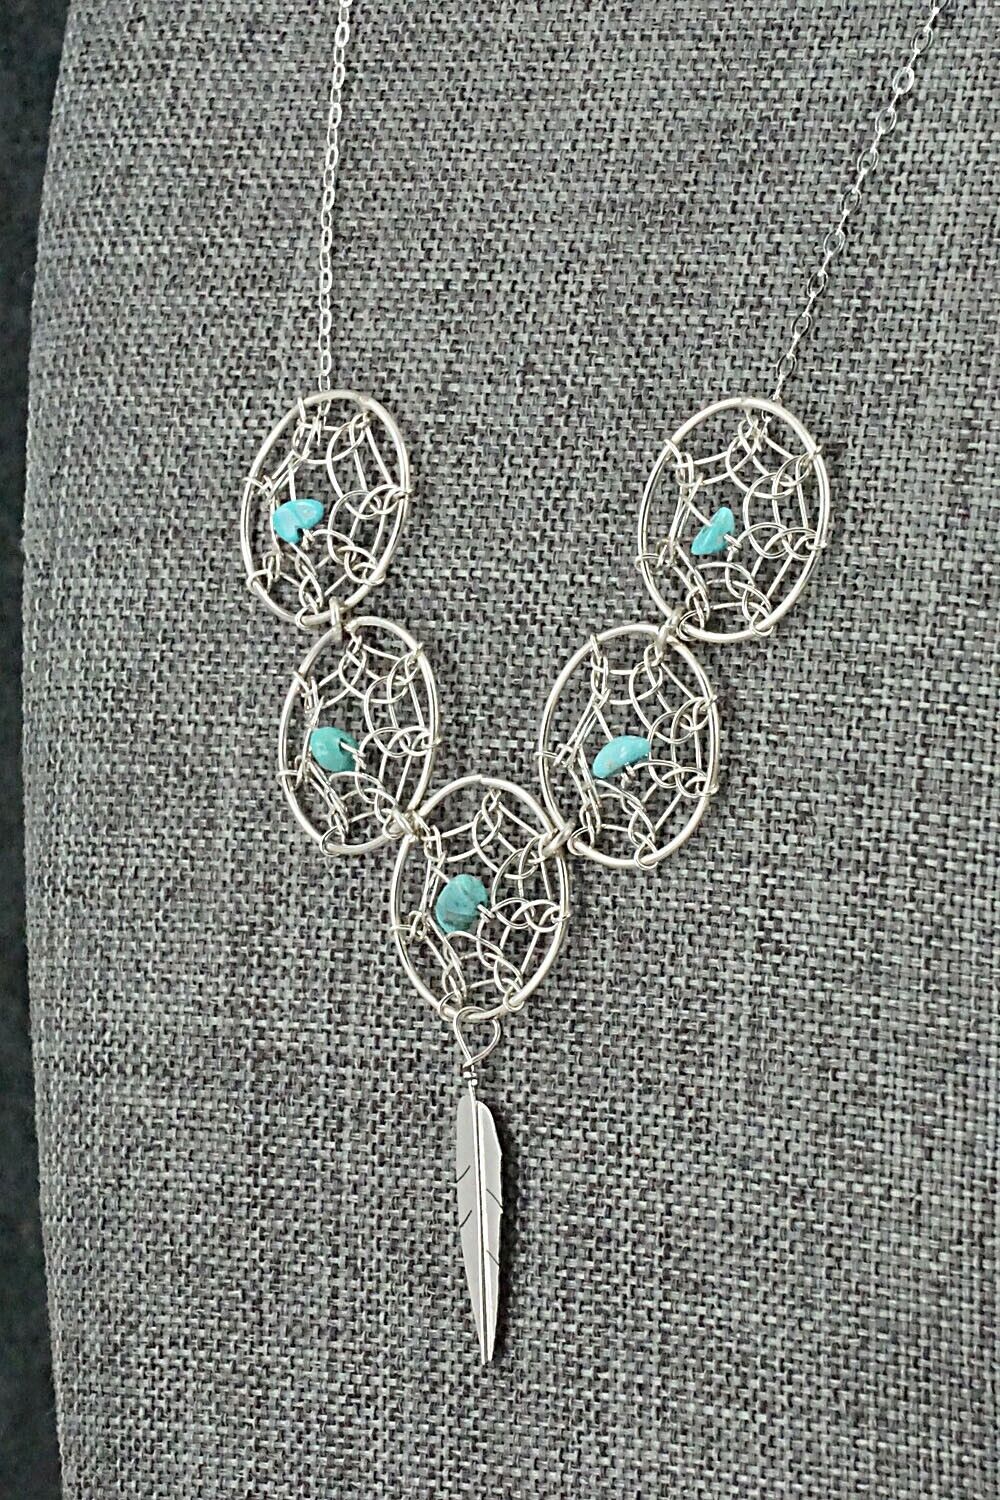 Turquoise & Sterling Silver Necklace - Lorenzo Arviso Jr.